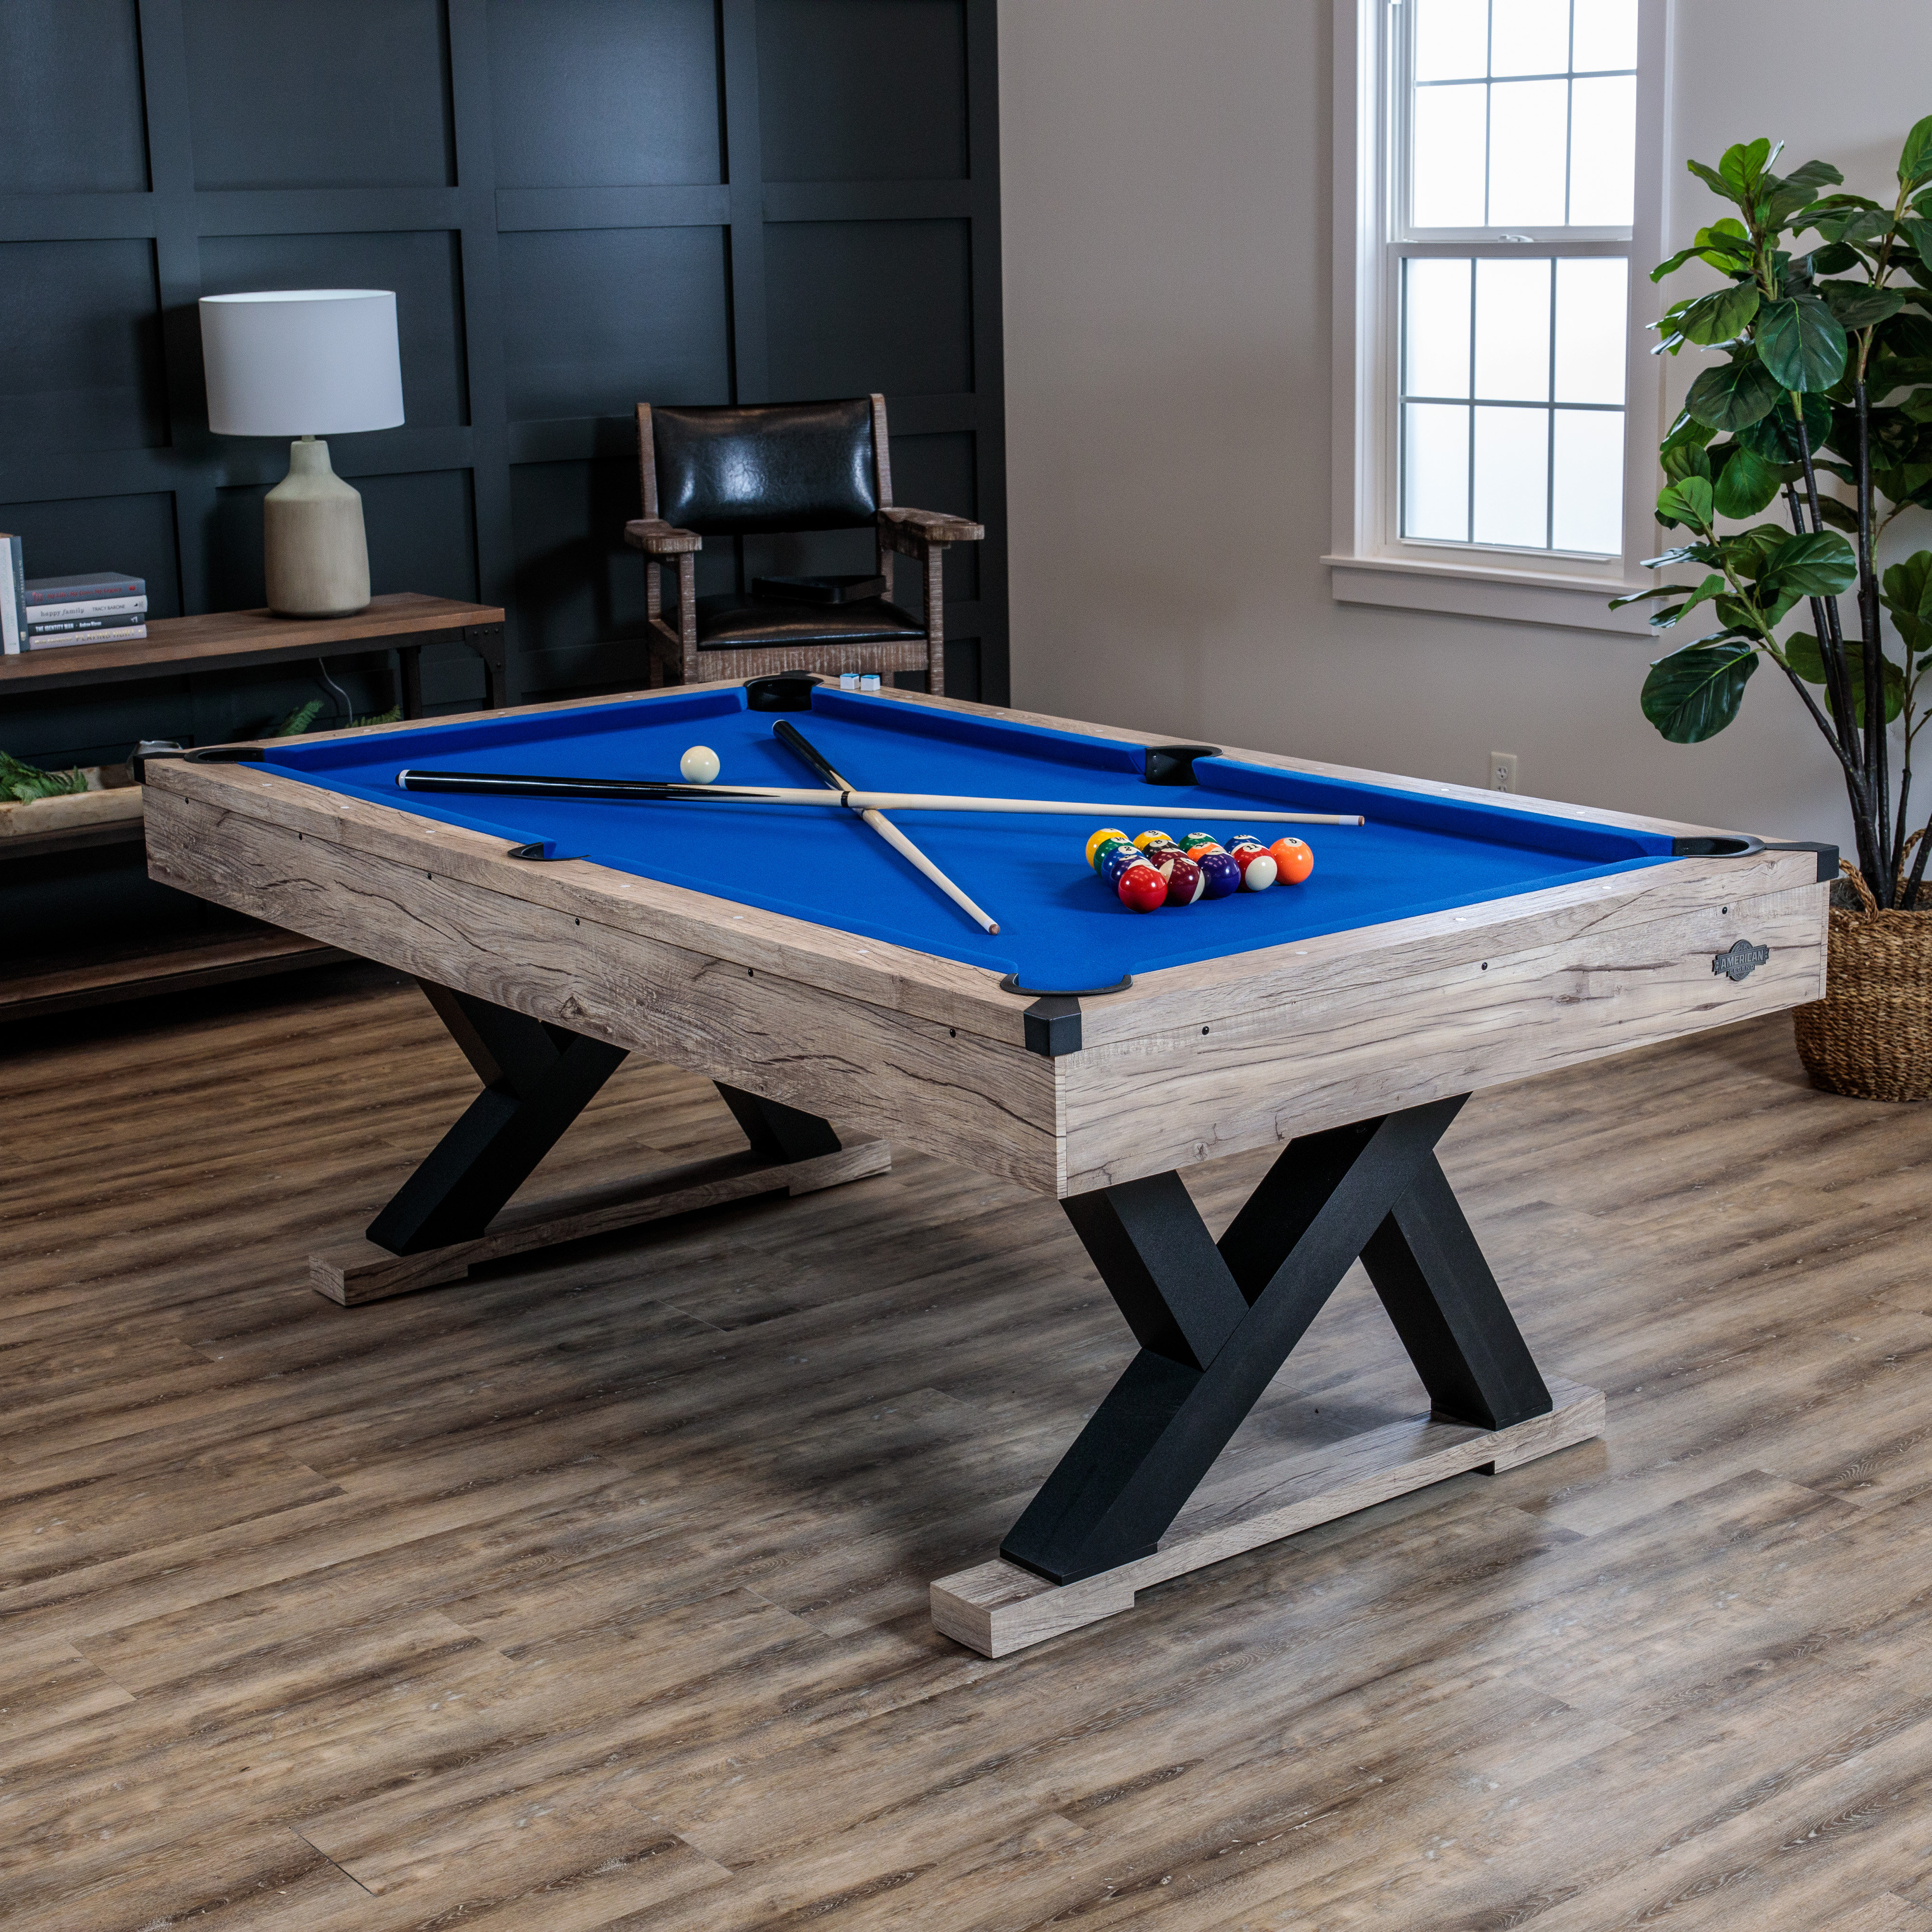 7' pool table $3000 louis vuitton - furniture - by owner - sale - craigslist